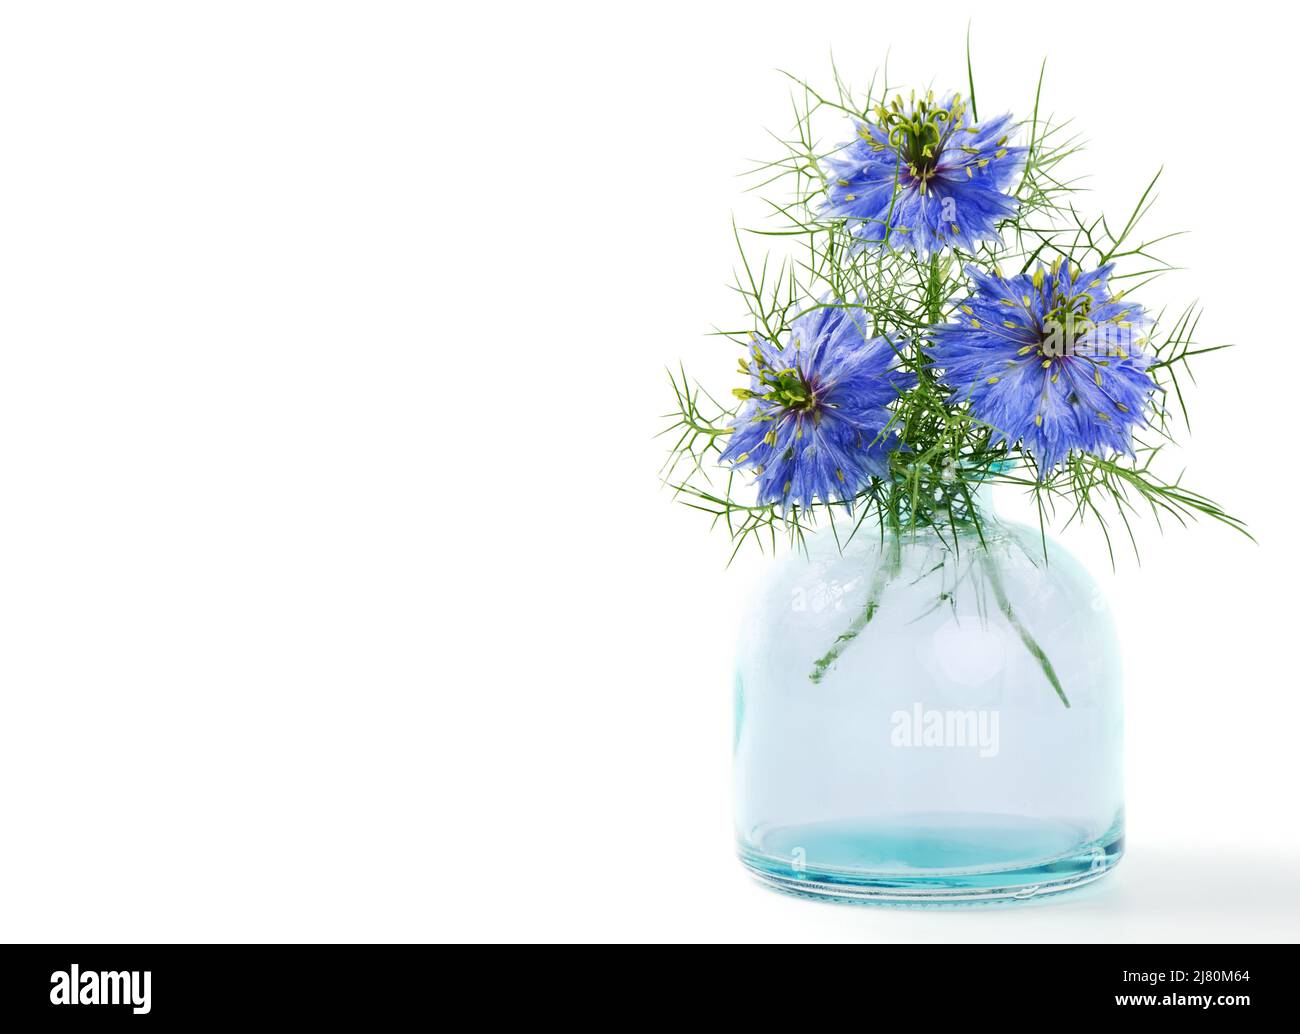 Black cumin flowers in a blue vase, isolated on white background with copy space Stock Photo